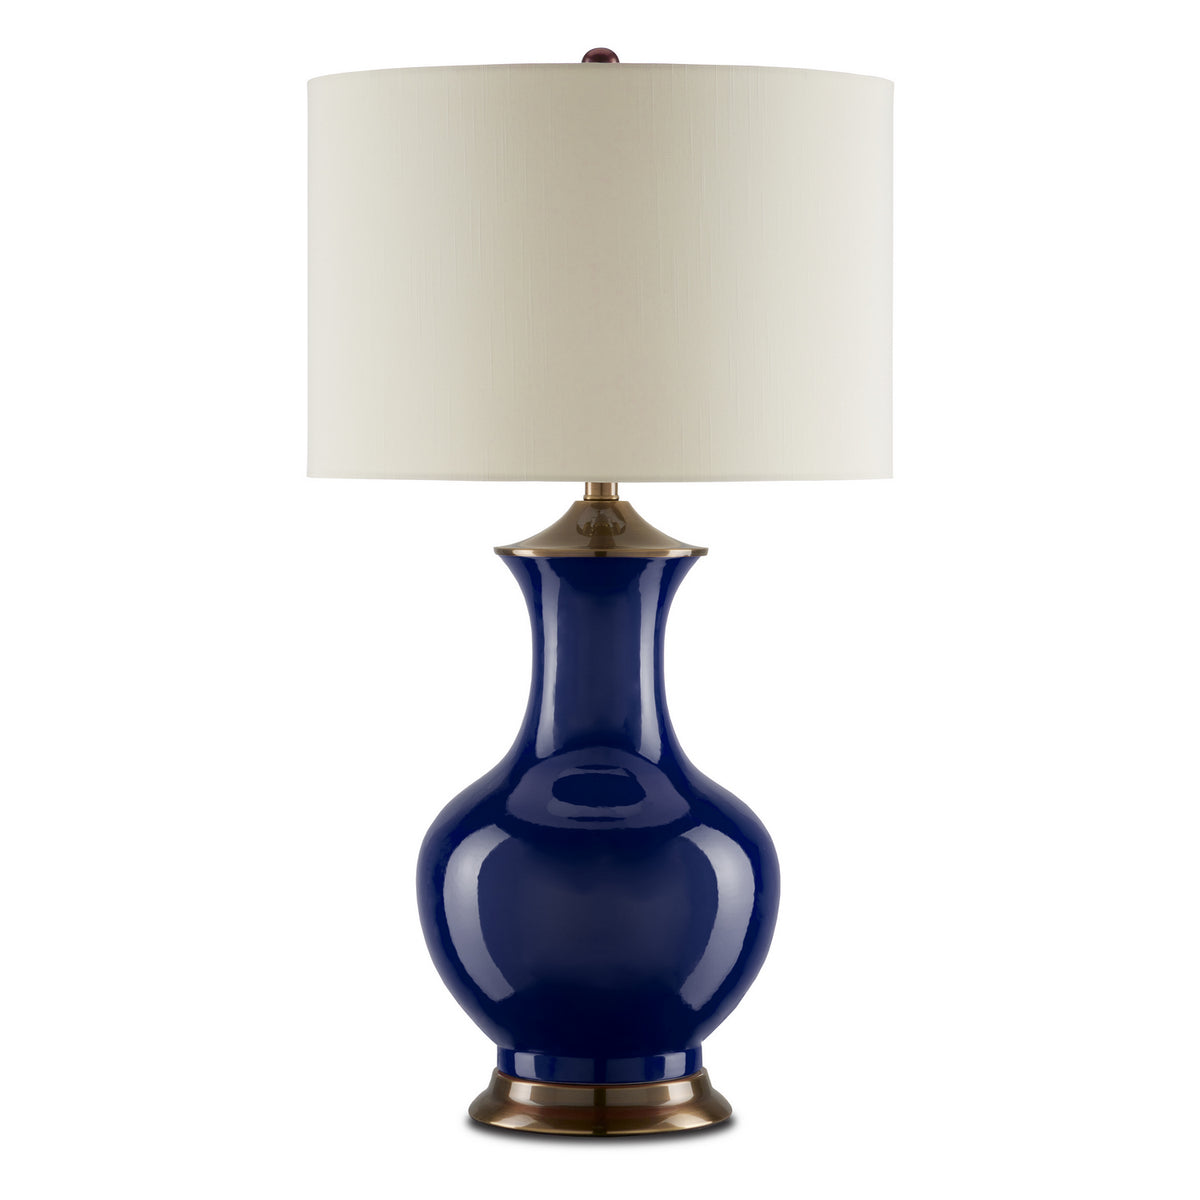 Currey and Company - 6000-0841 - One Light Table Lamp - Lilou - Blue/Antique Brass